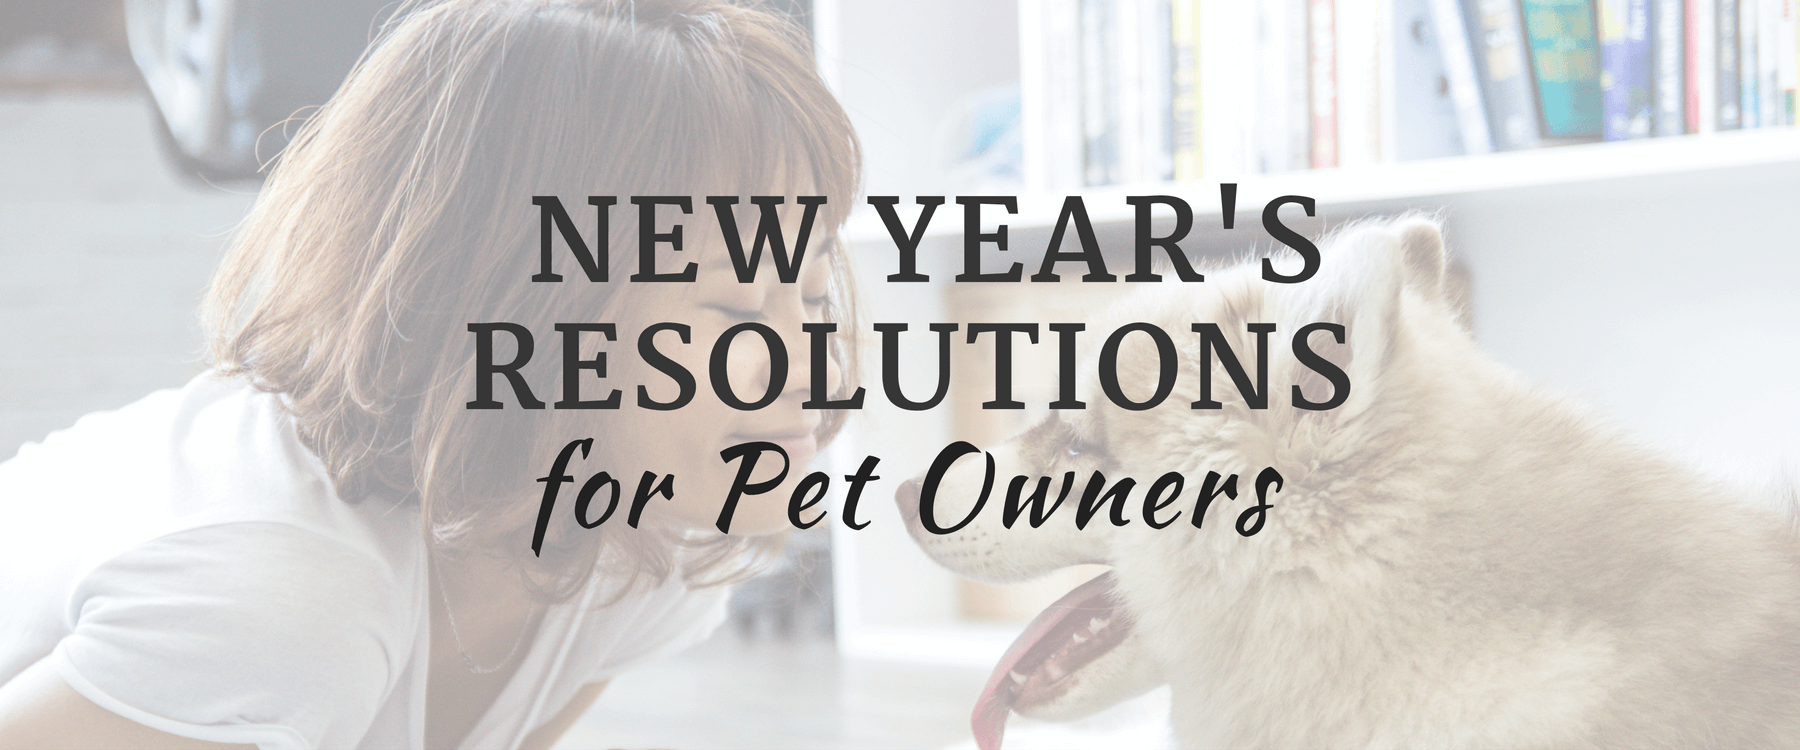 Top New Year's Resolutions for Pet Owners